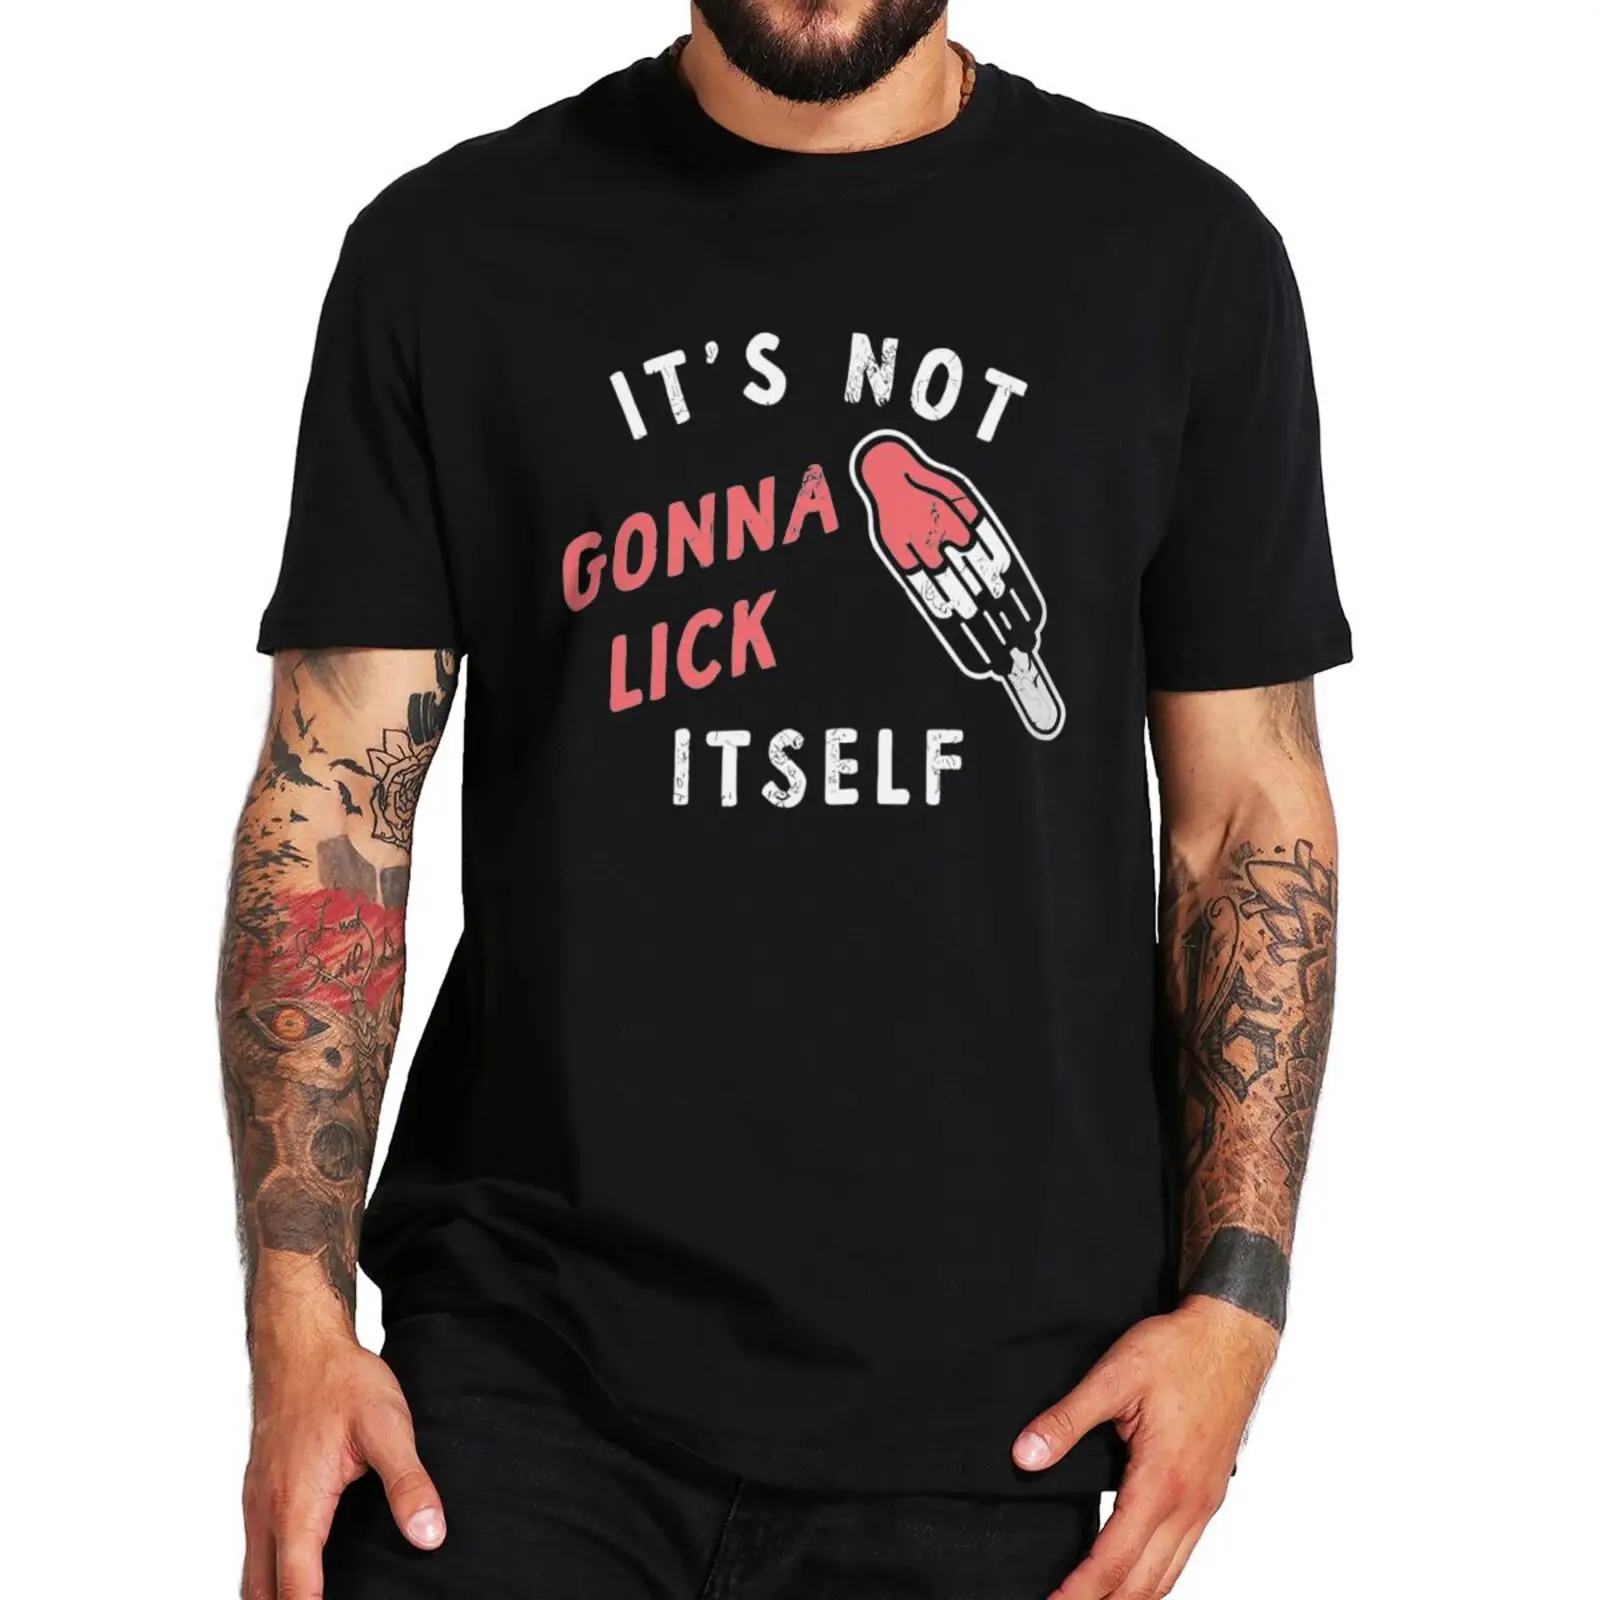 

Its Not Going to Lick Itself T Shirt Funny Adult Humor Sex Joke Slang Tops 100% Cotton Unisex Casual Soft T-shirts EU Size